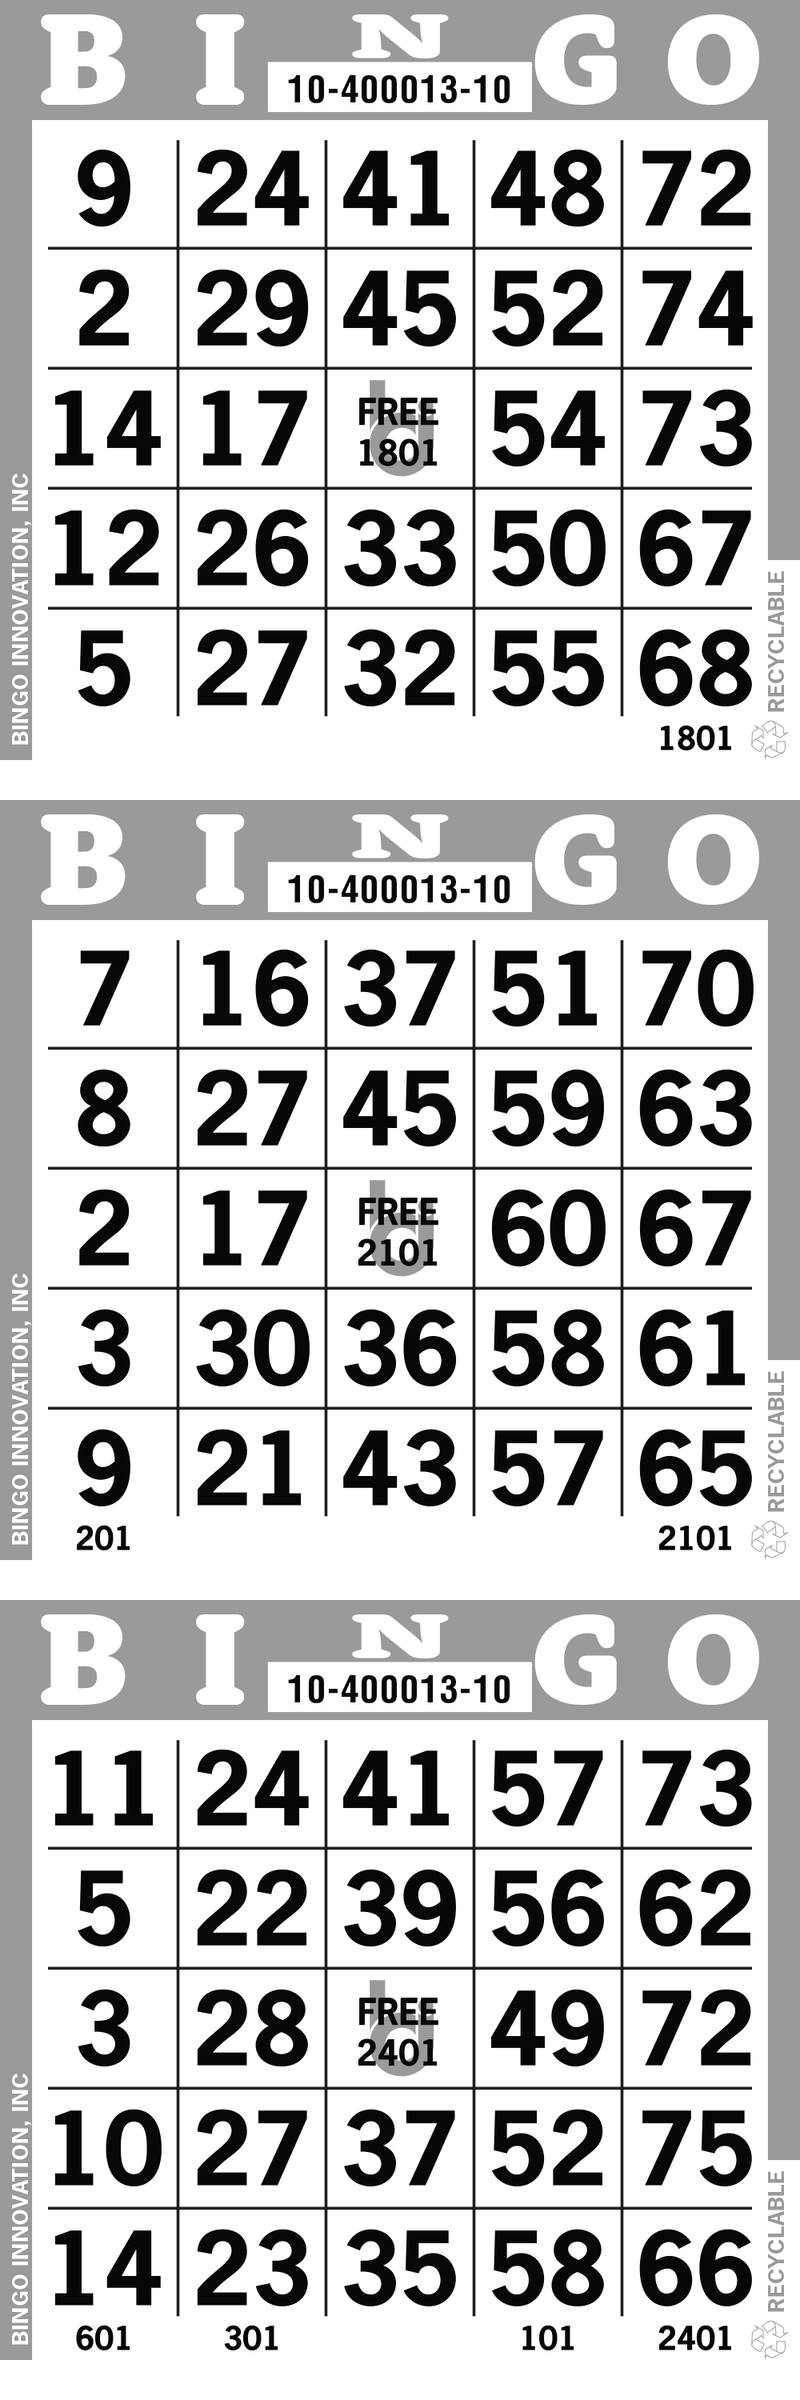 3on Bingo Paper By The Case 3,000 Sheets